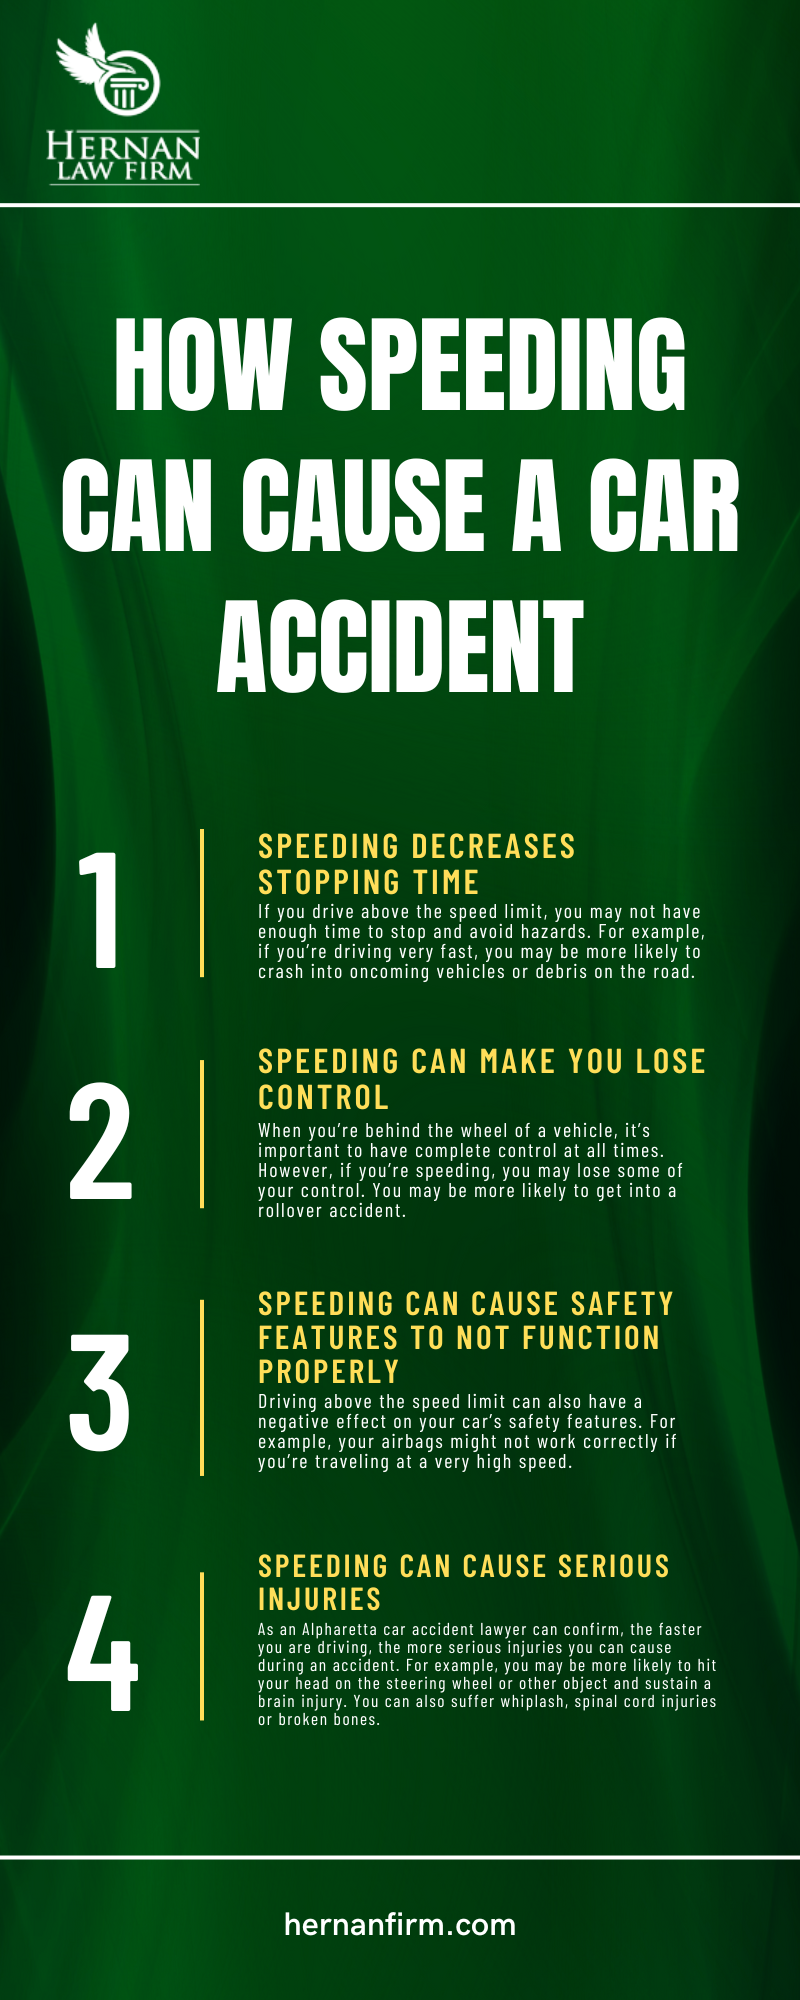 HOW SPEEDING CAN CAUSE A CAR ACCIDENT